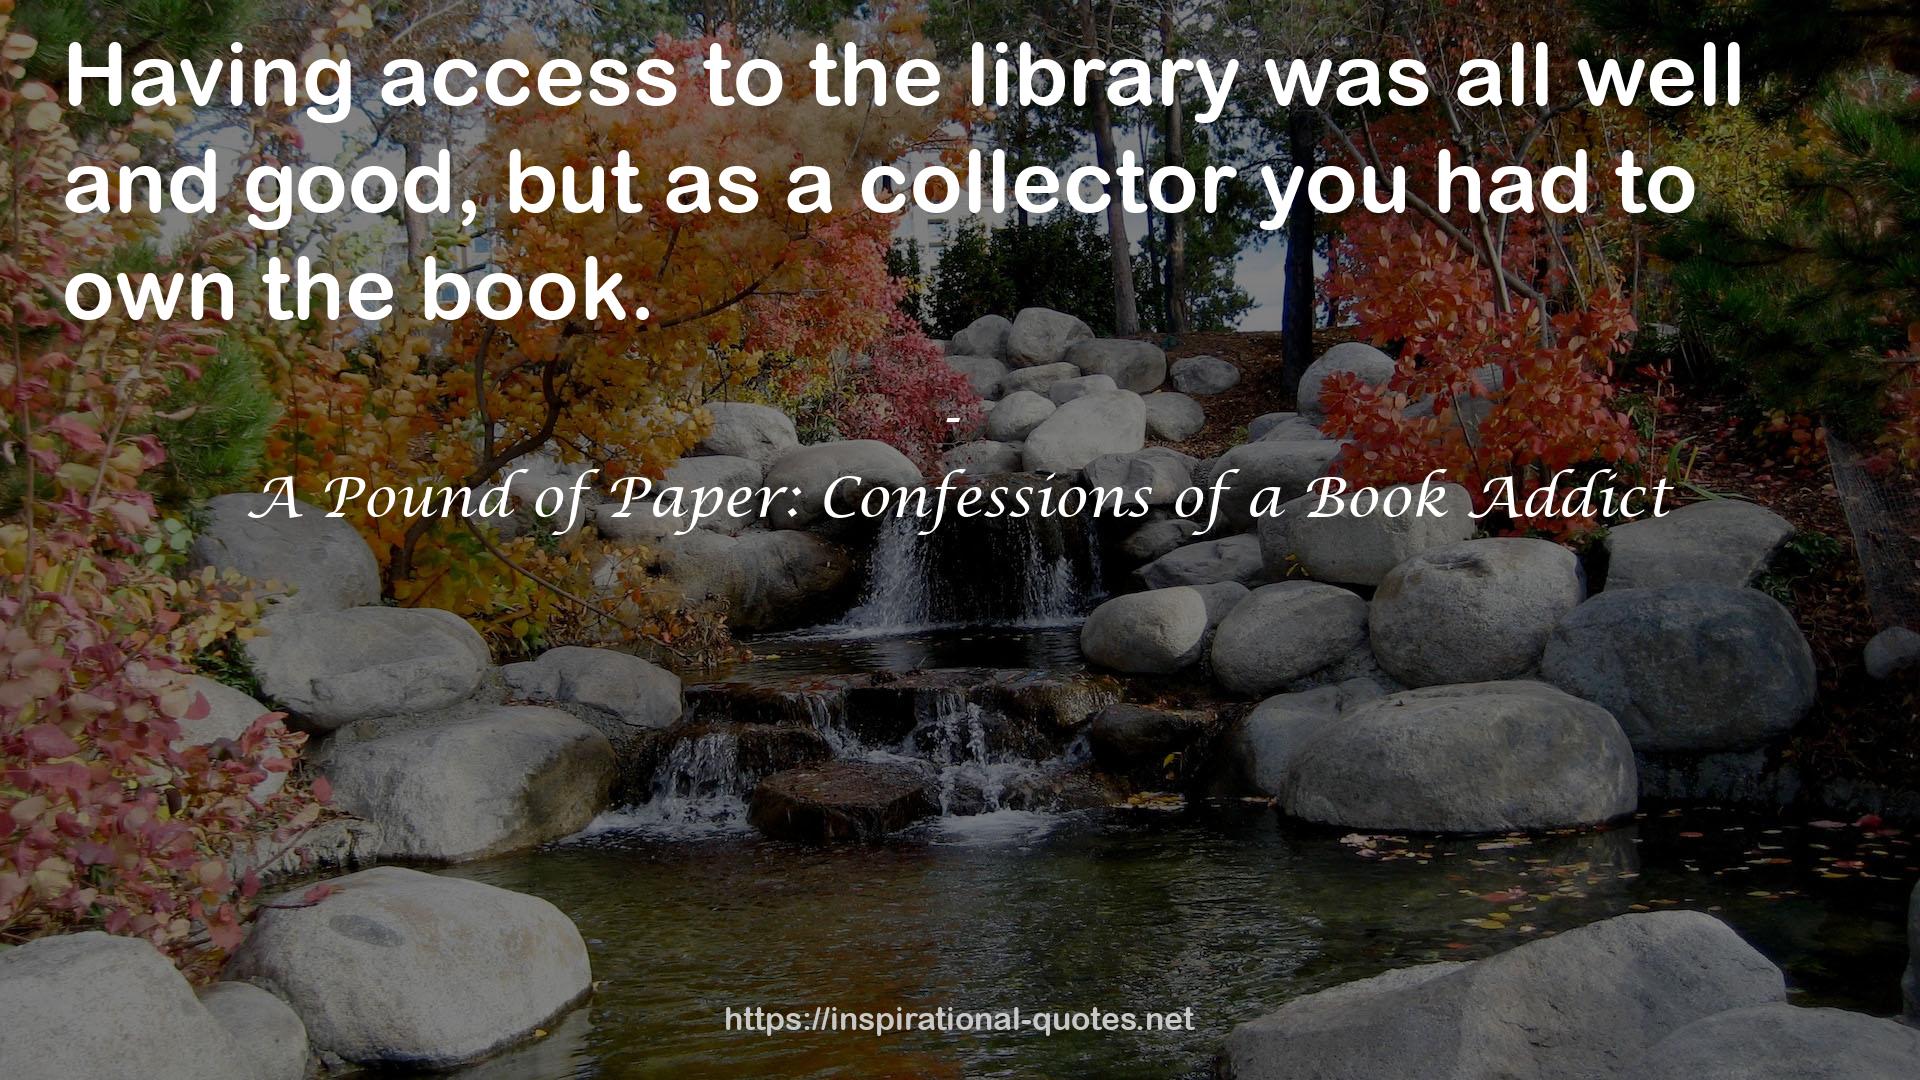 A Pound of Paper: Confessions of a Book Addict QUOTES